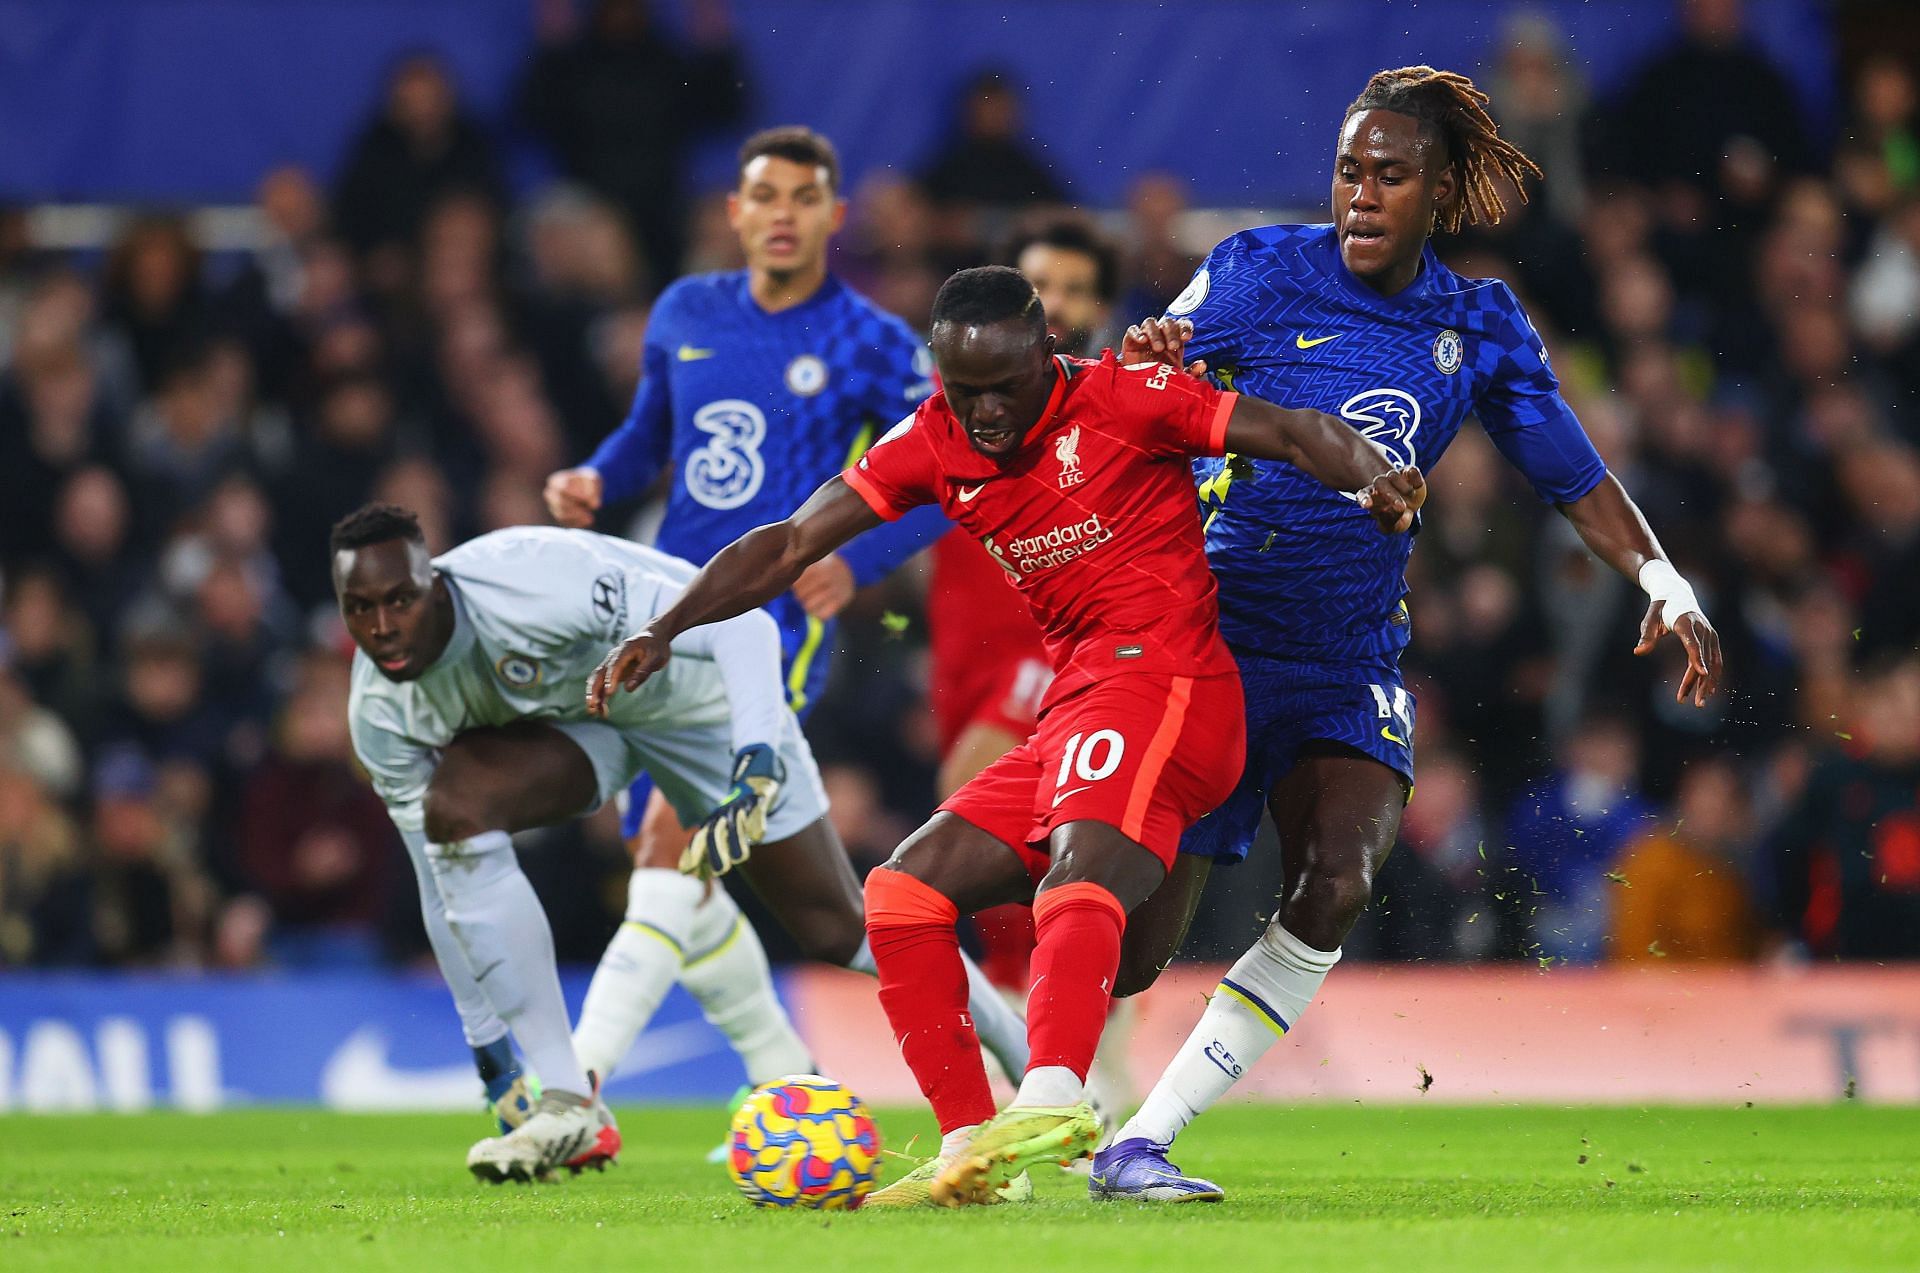 Mendy (left) and Mane (right) were the star performers on the night.